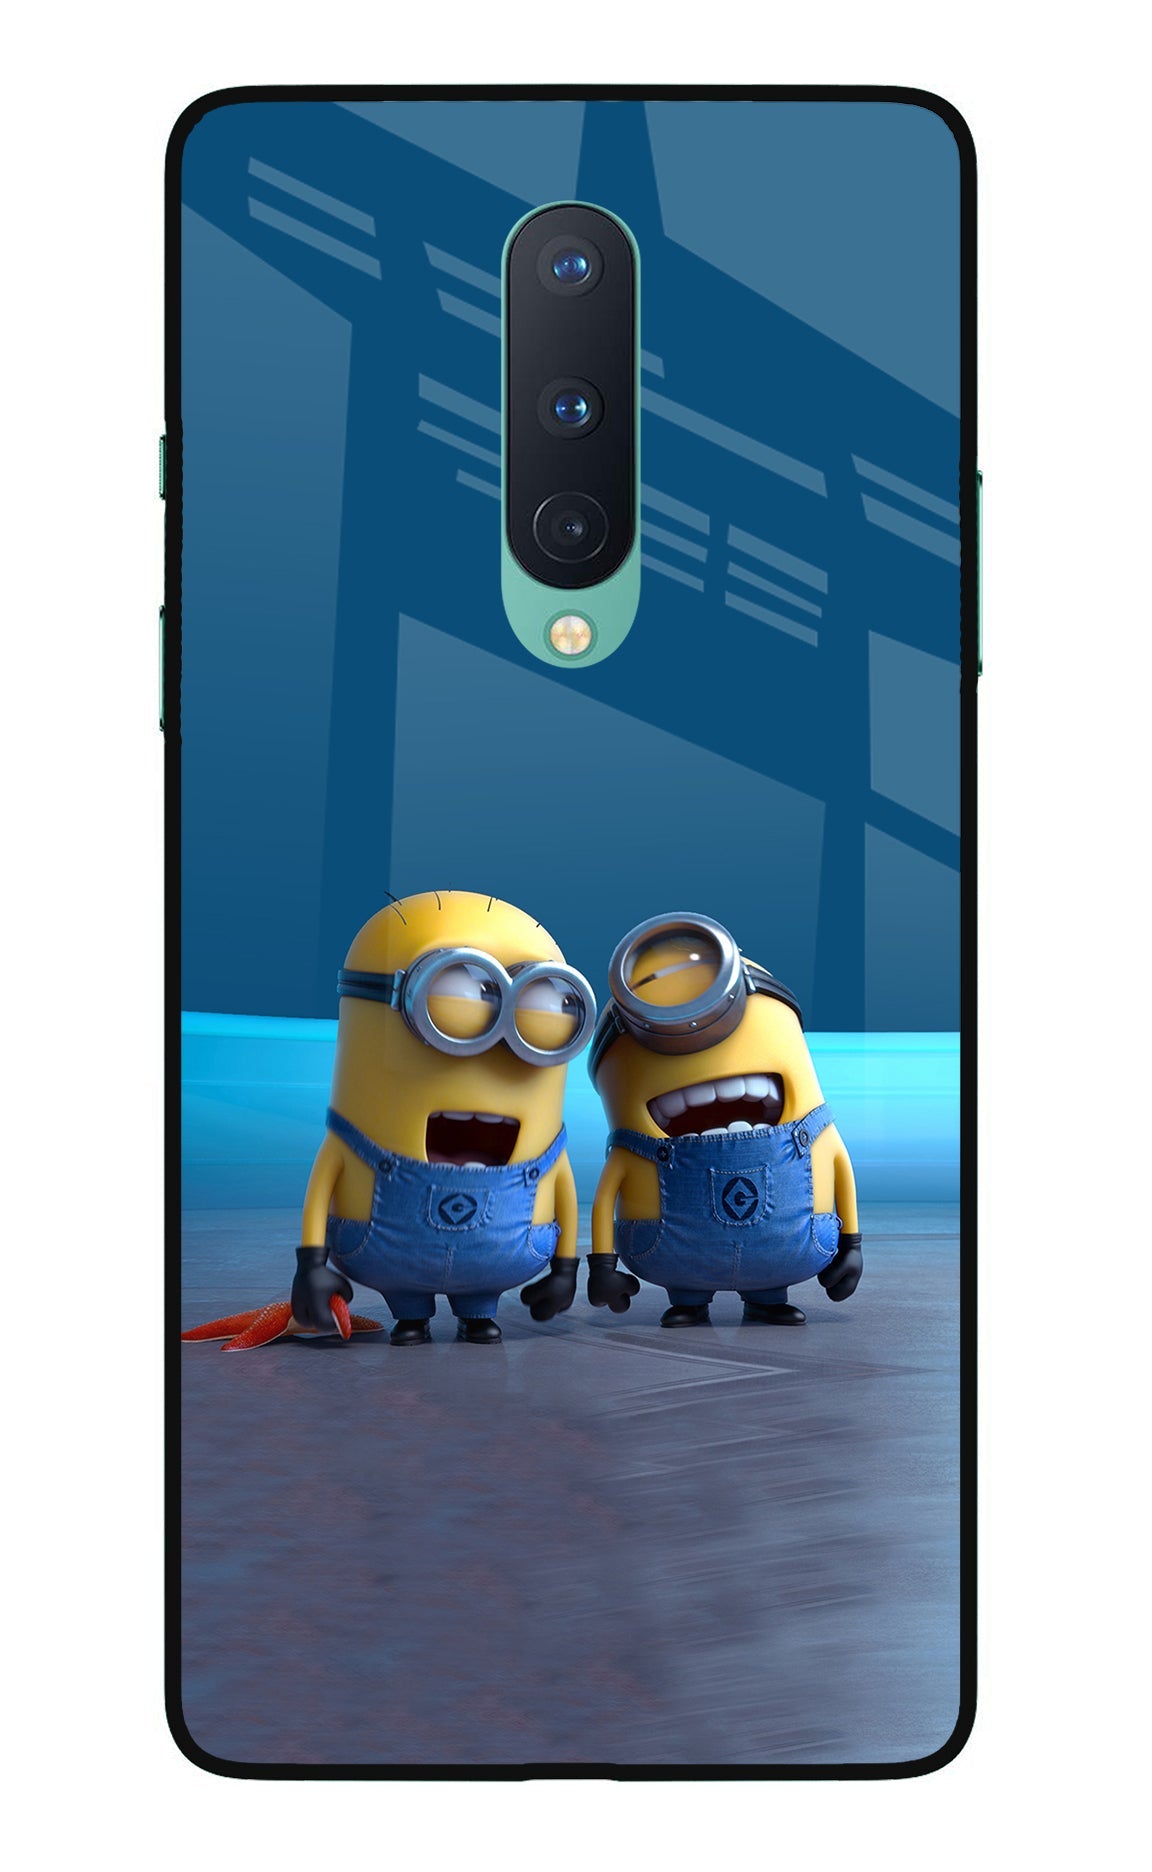 Minion Laughing Oneplus 8 Glass Case